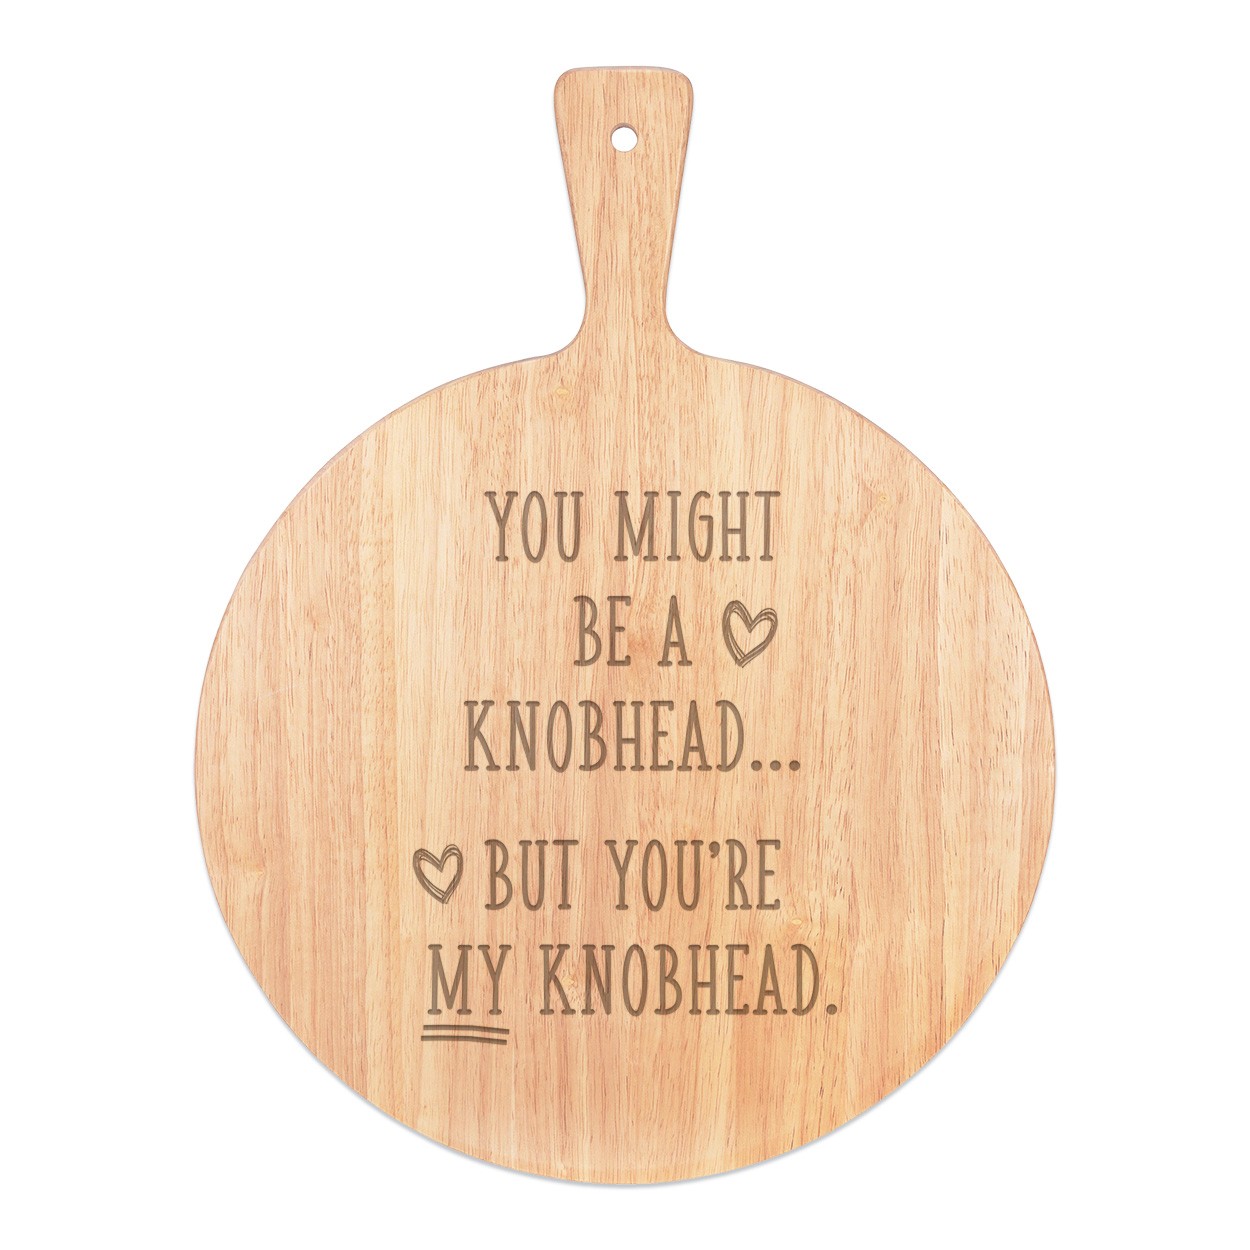 You Might Be A Kn-head But You're My A Kn-head Pizza Board Paddle Serving Tray Handle Round Wooden 45x34cm